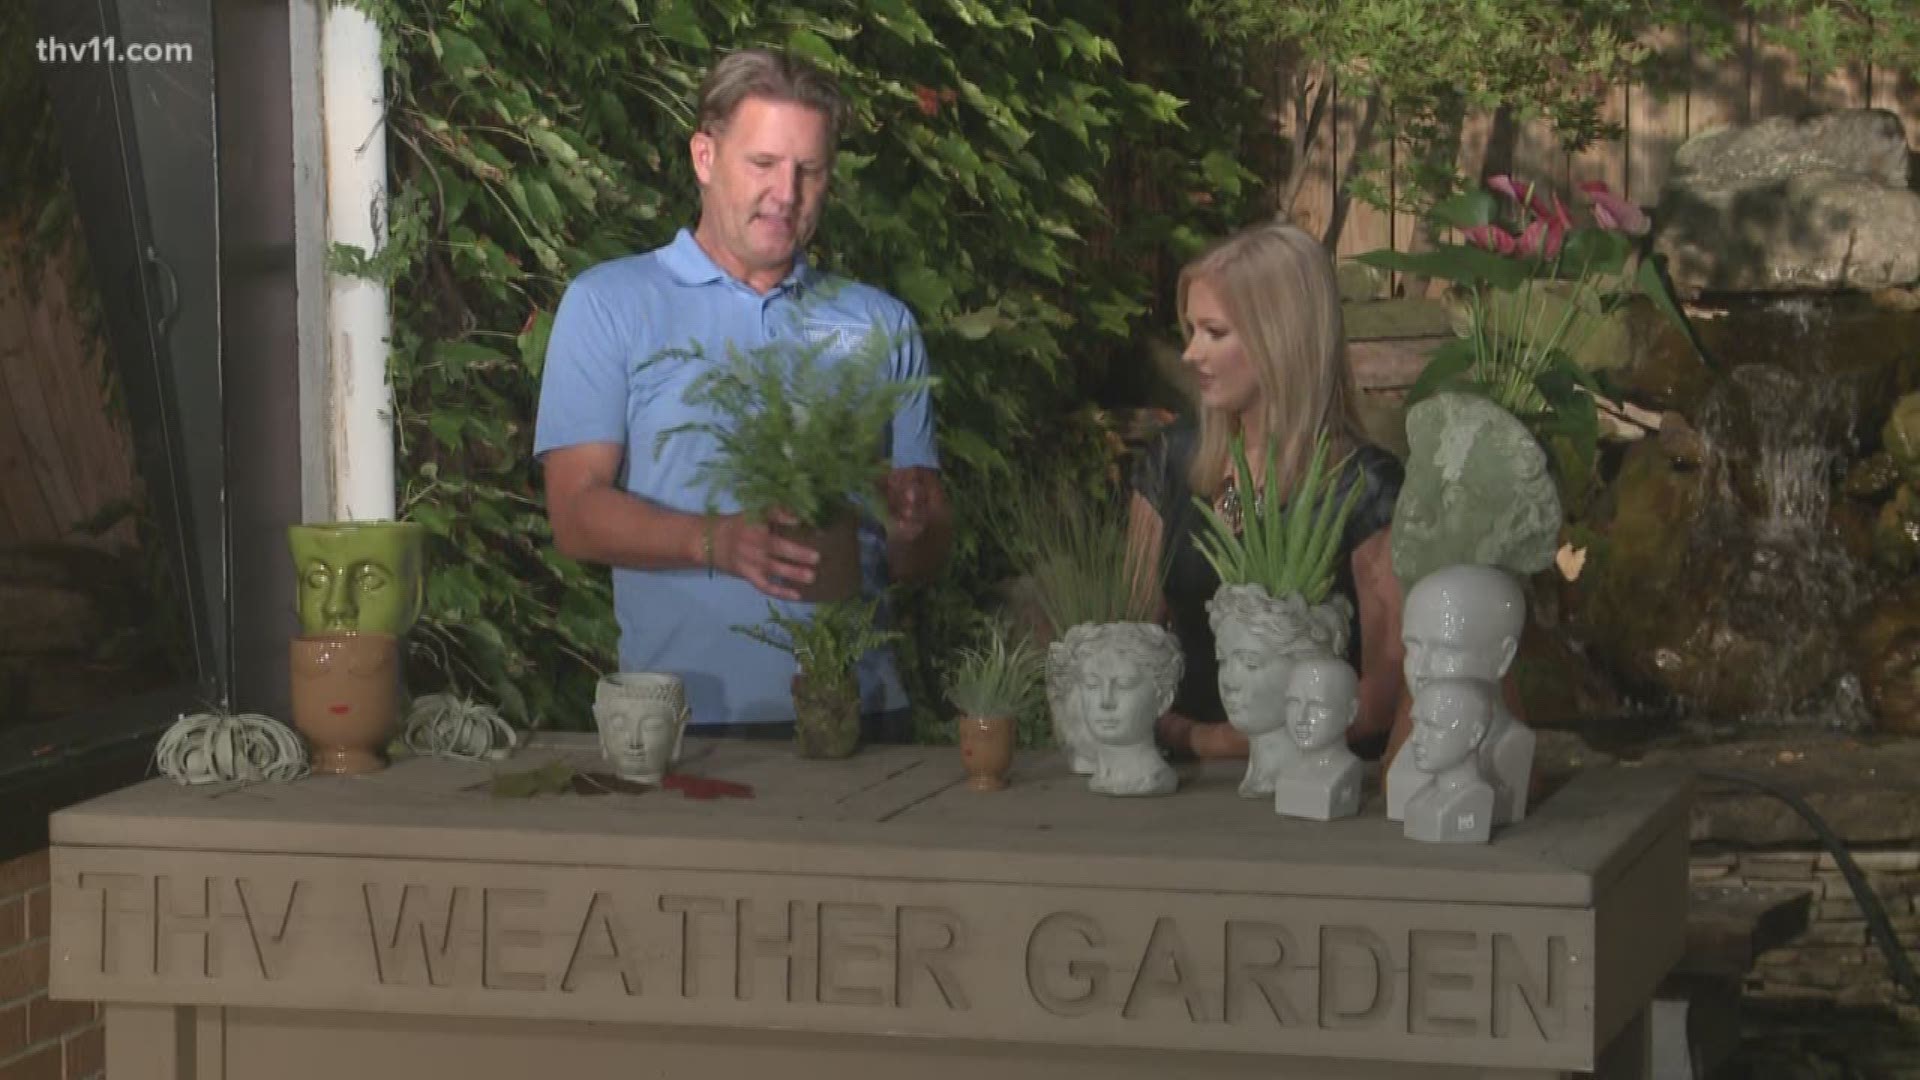 Chris H. Olsen shows us how to add style and fun to your home with head planters.